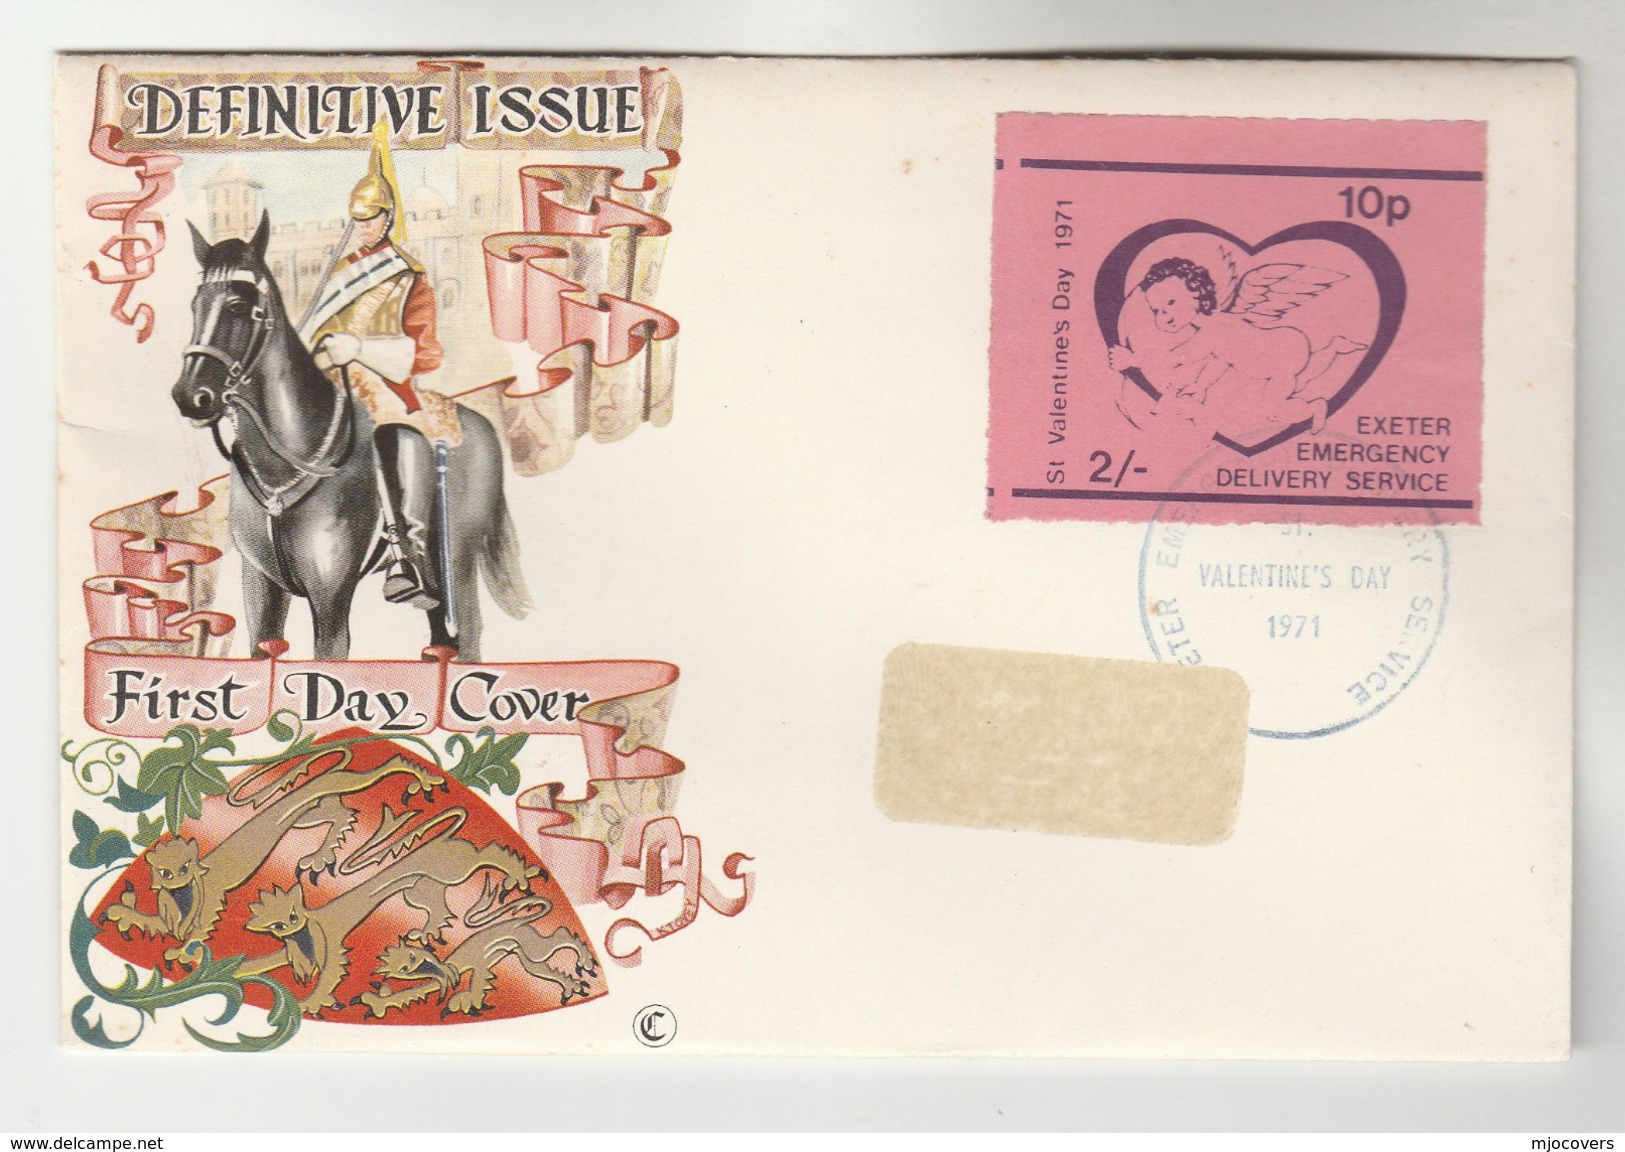 1971 Exeter GB POSTAL STRIKE COVER  2/- EXETER EMERGENCY DELIVERY SERVICE VALENTINES Label Great Britain - Erinnofilie